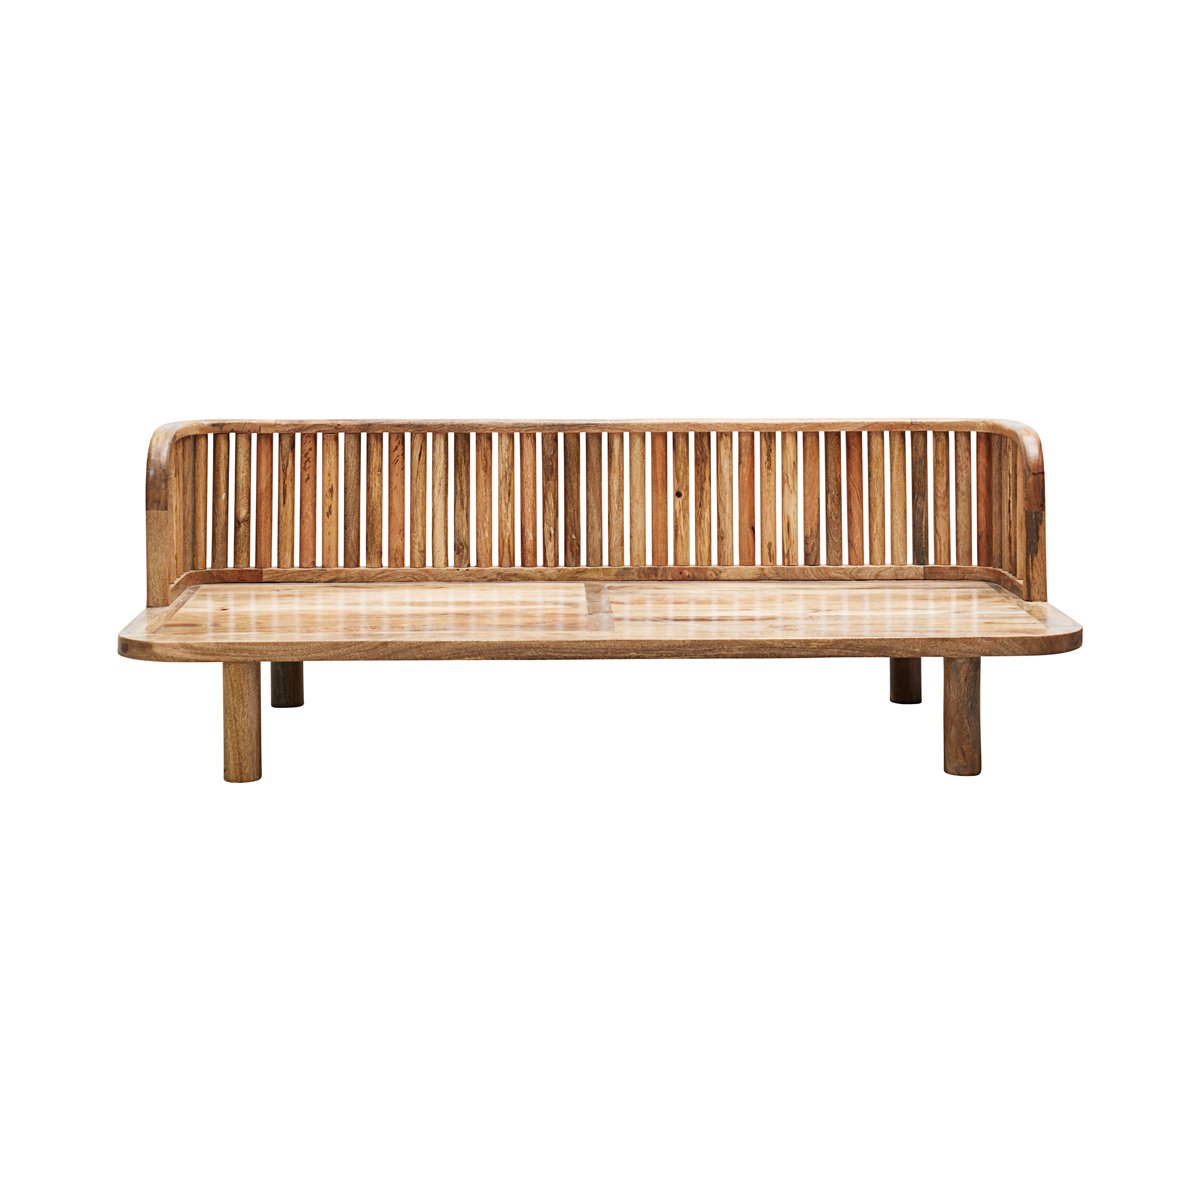 Mango wood Daybed Morena Nature House Doctor